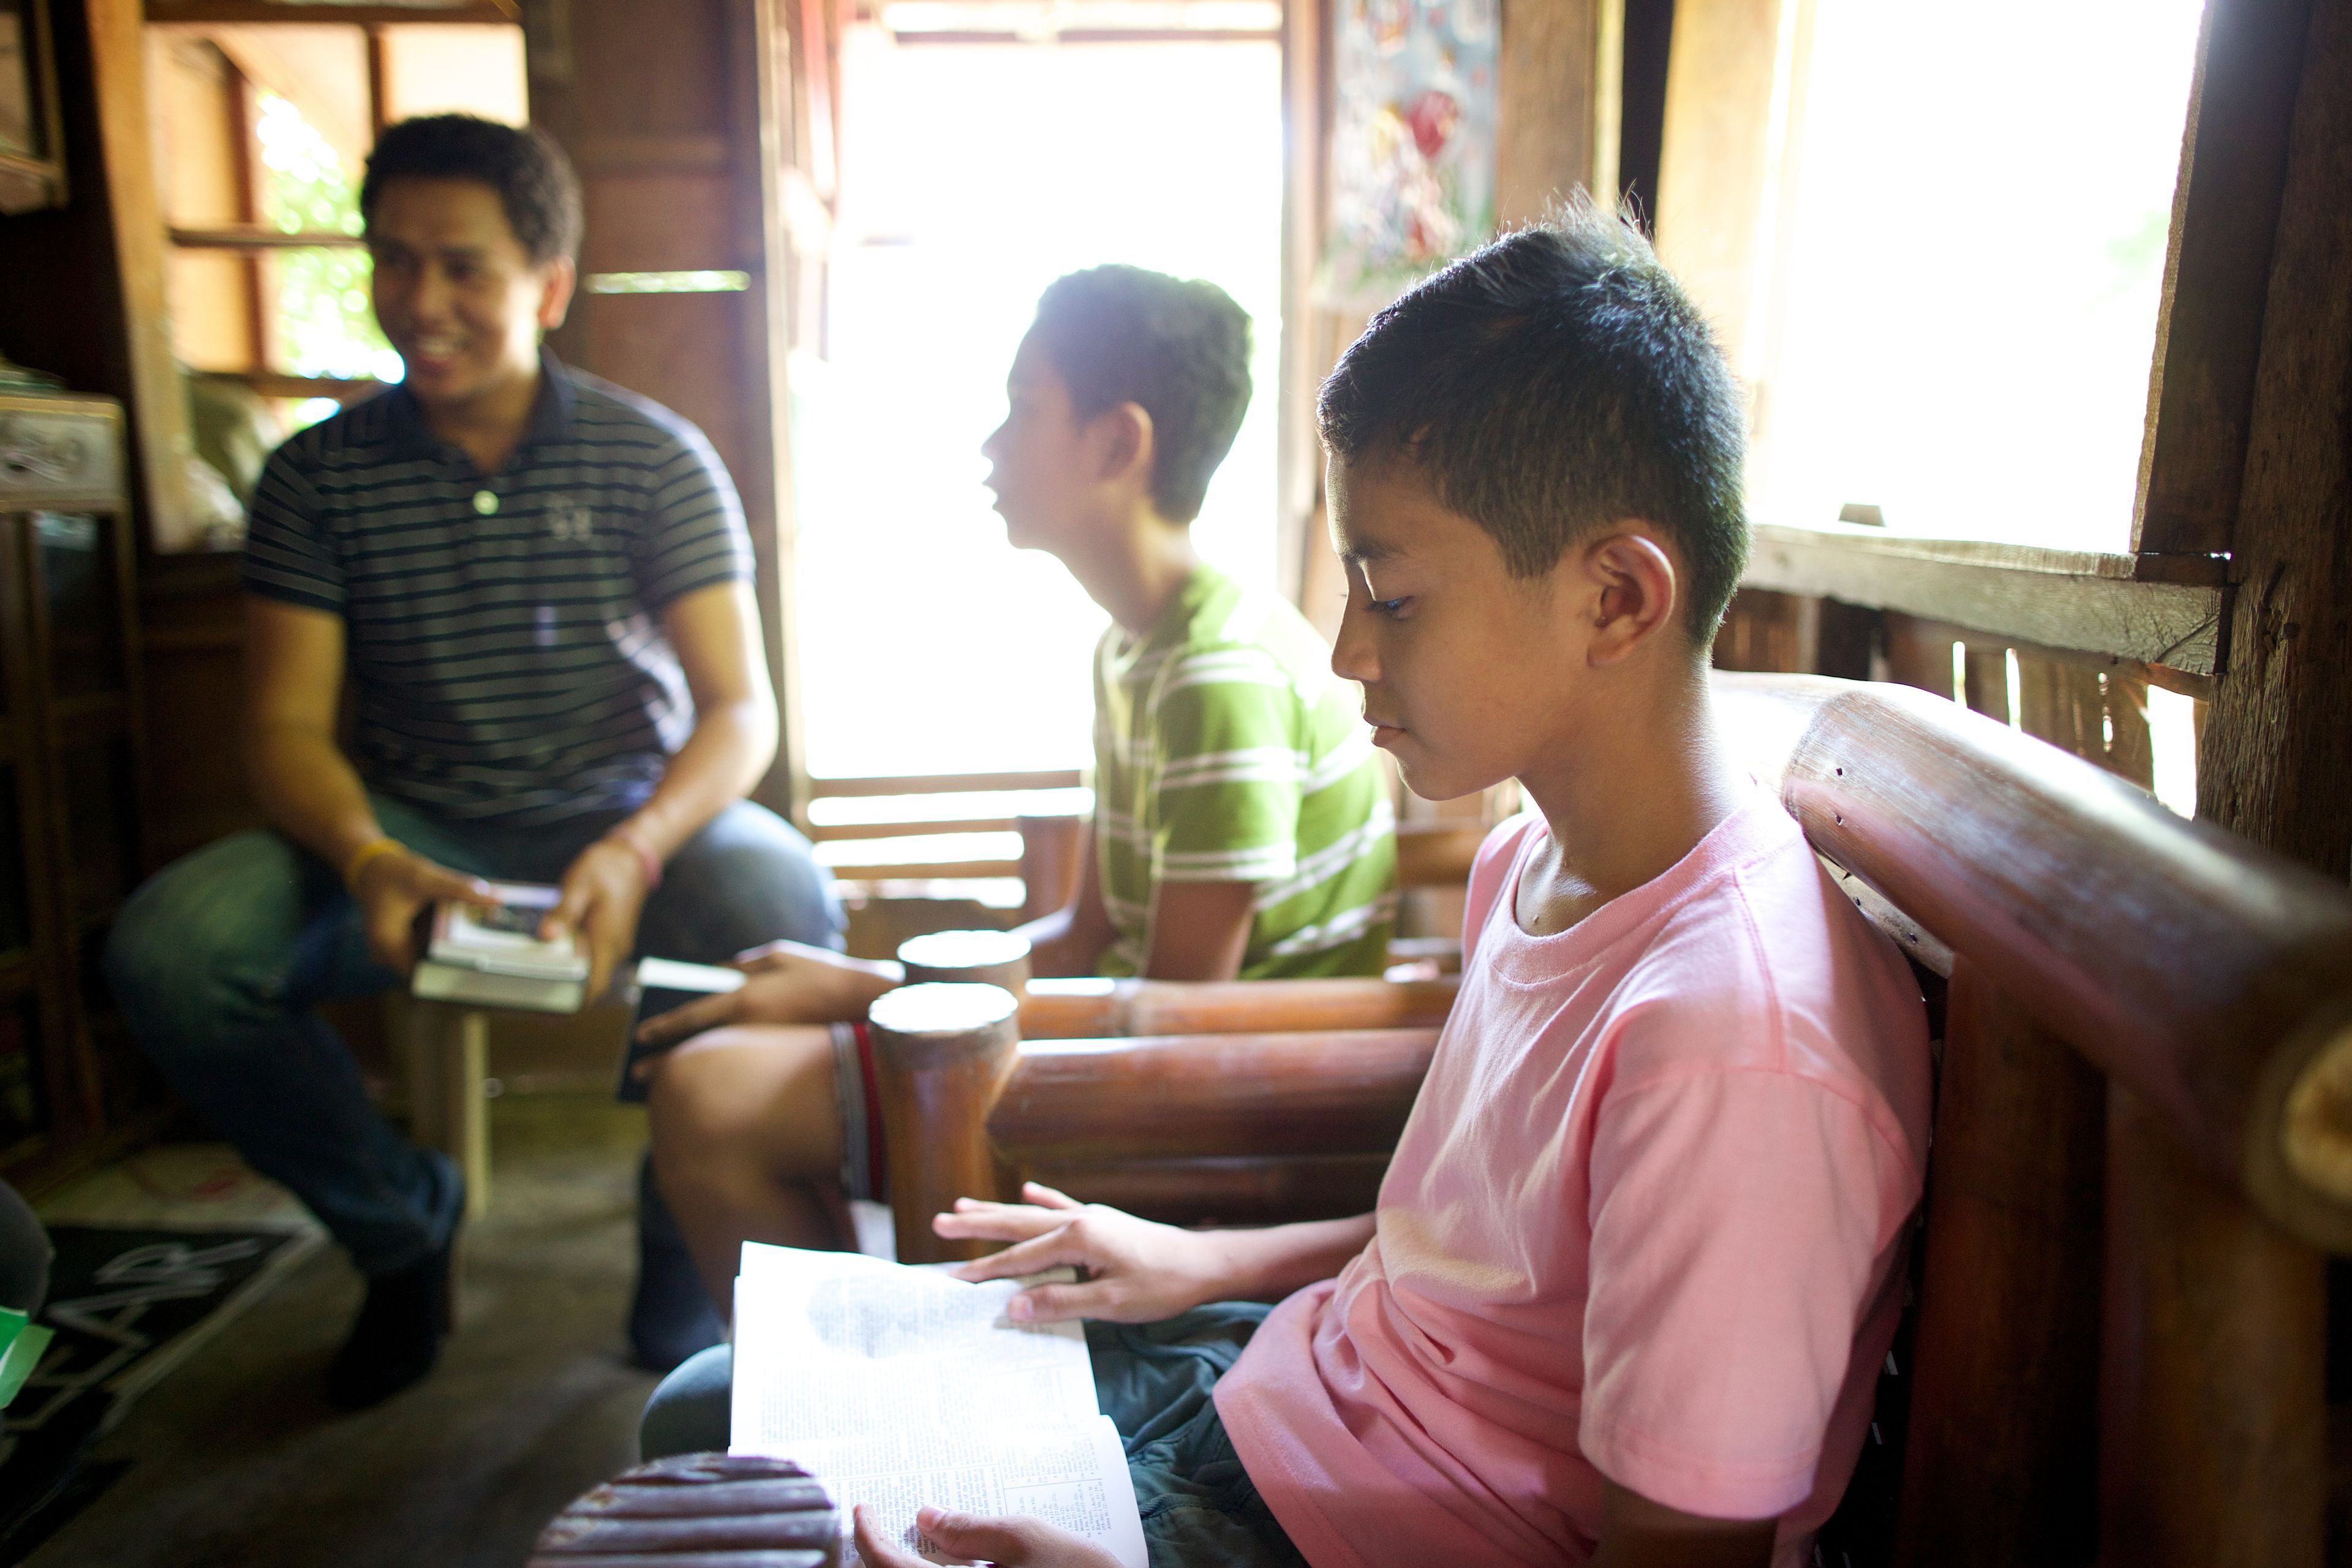 Two ministering brothers visiting a home, sitting near a young man while reading from the scriptures.